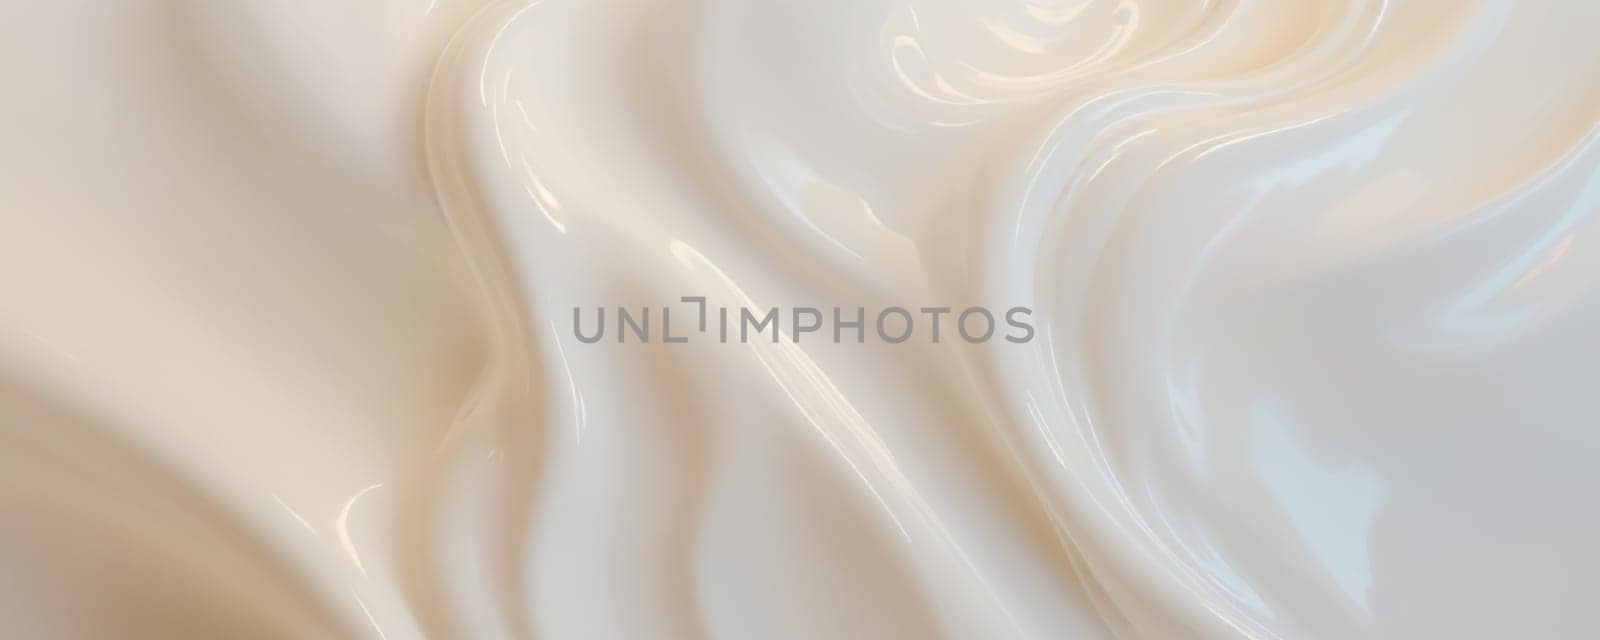 A smooth and glossy texture that looks like liquid or silk fabric. It has different shades of grey that create a soft and elegant appearance. The lines are wavy and make patterns that give a sense of movement to the image. There is a play of light and shadow that adds depth, making some areas look raised while others look recessed. The image has an abstract and artistic quality. Generative AI